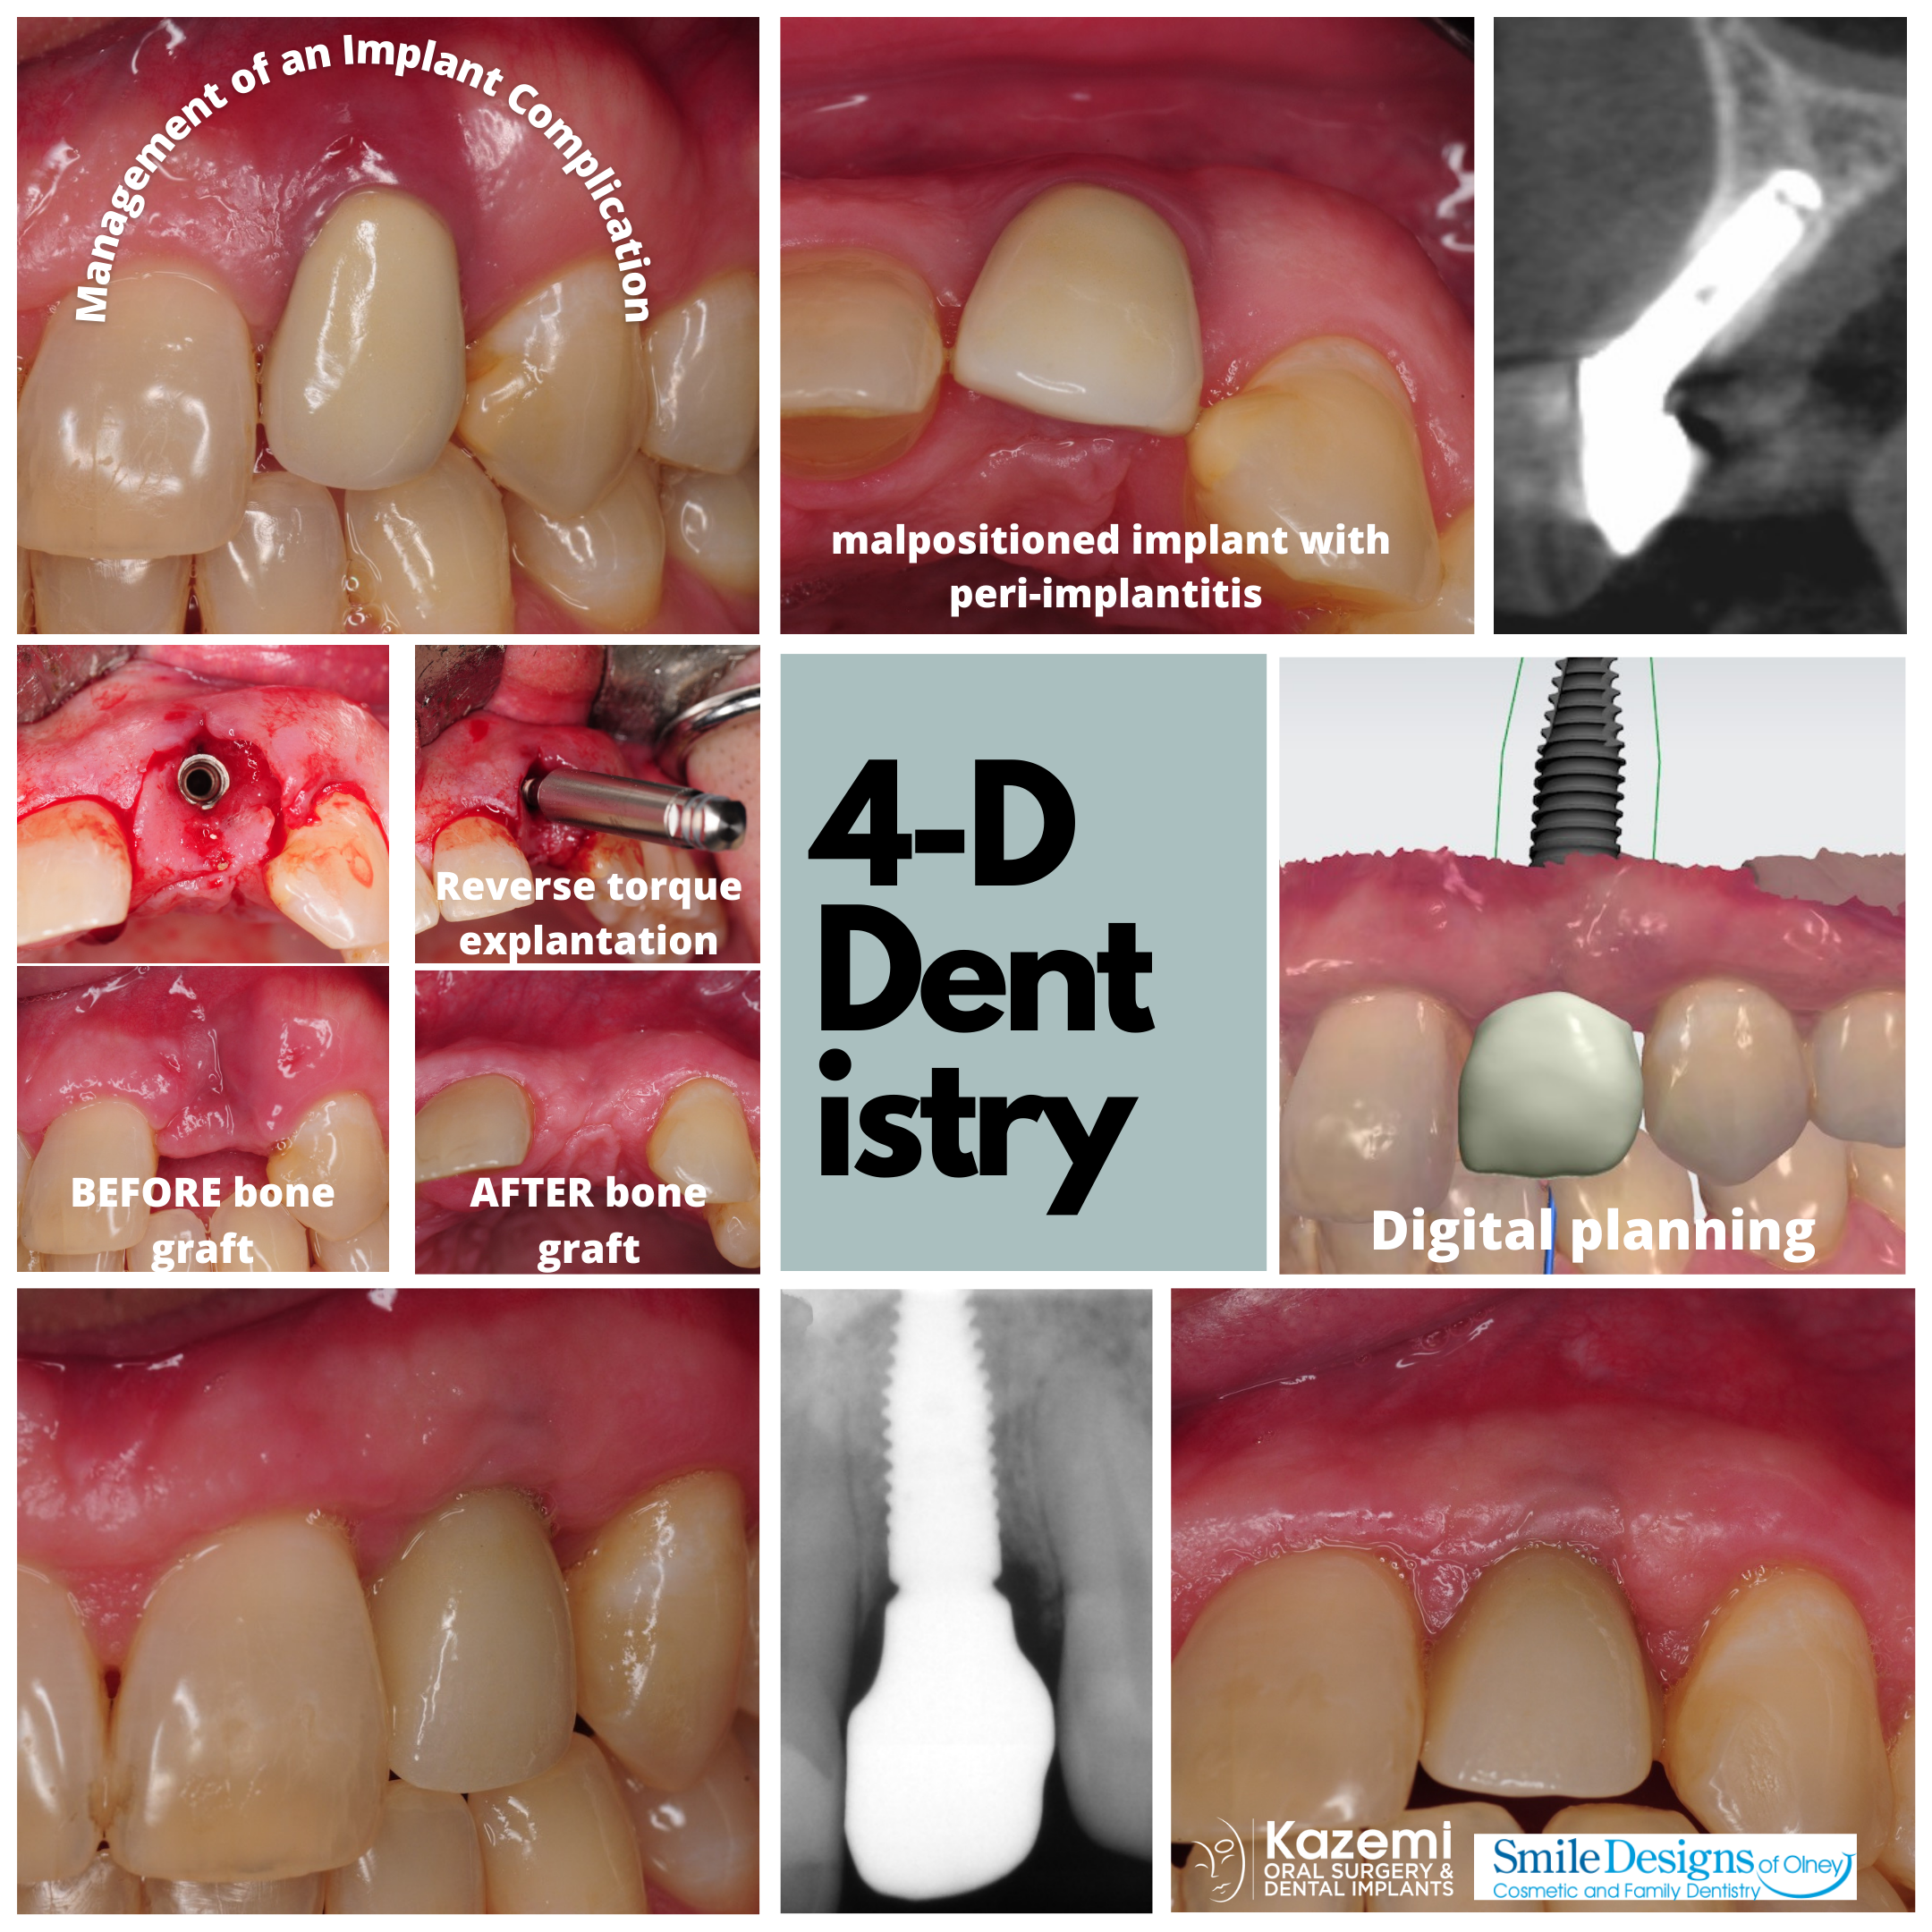 Revision treatment of a dental implant complication involving upper lateral incisor